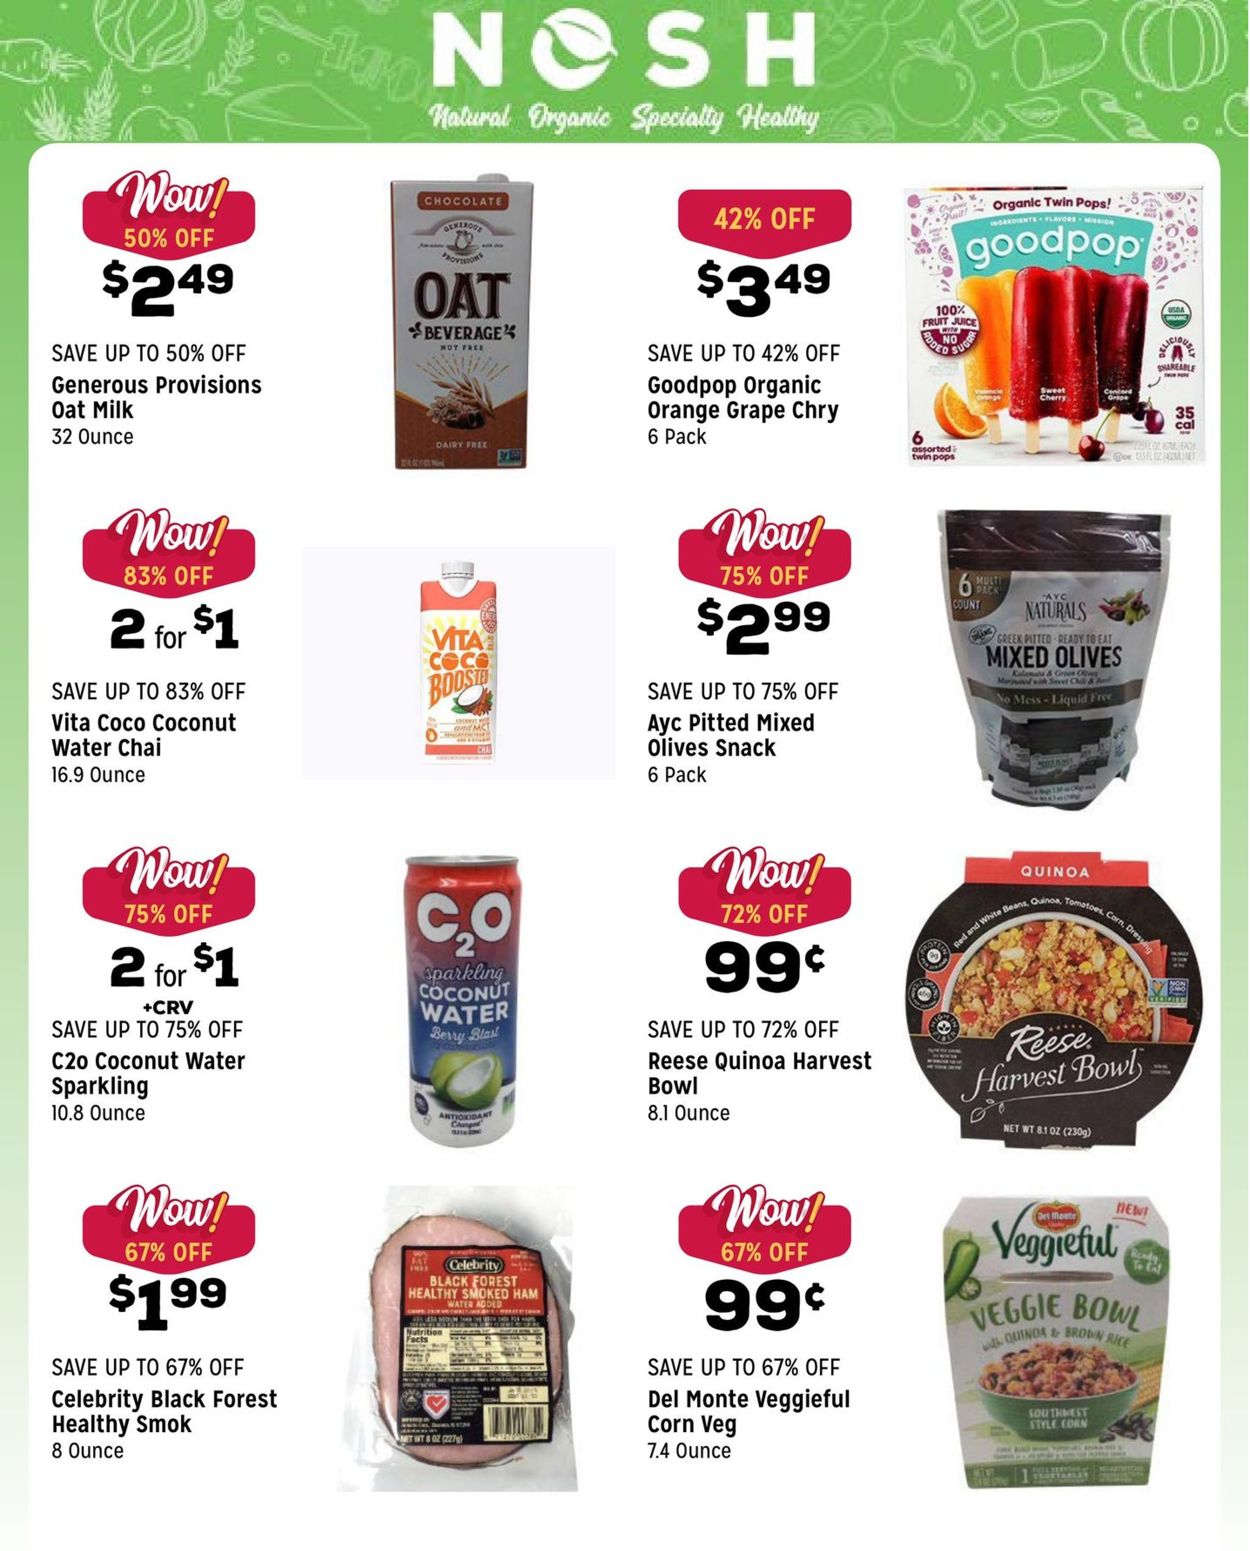 Catalogue Grocery Outlet from 03/30/2022